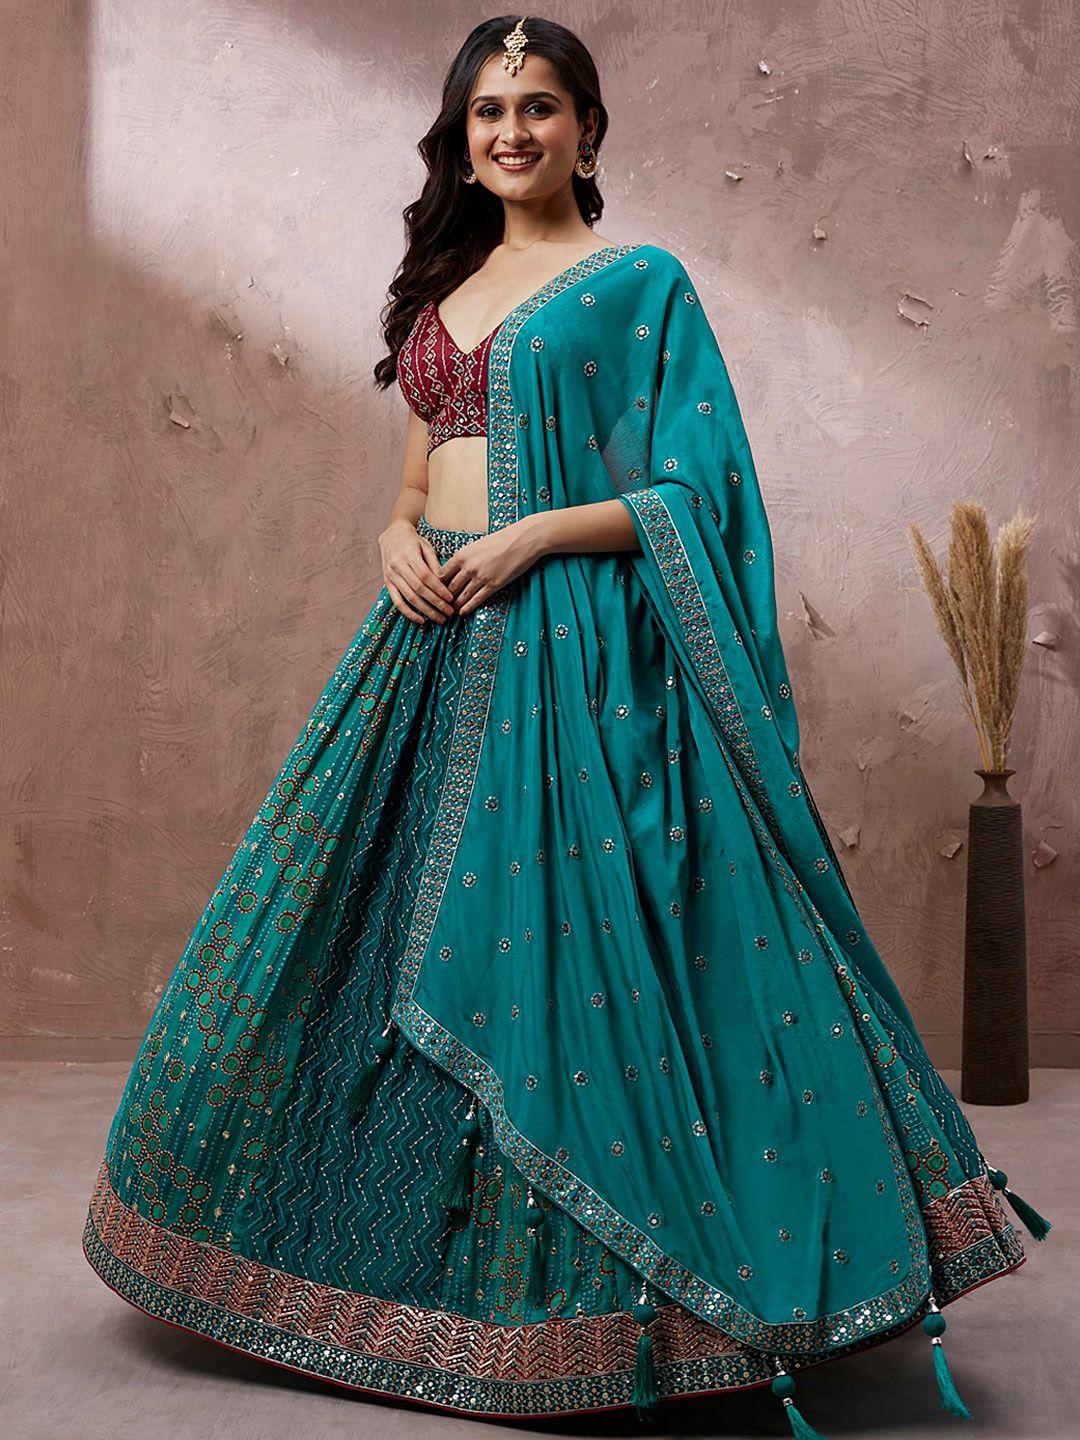 panchhi-ethnic-motifs-embroidered-sequinned-lehenga-choli-with-dupatta